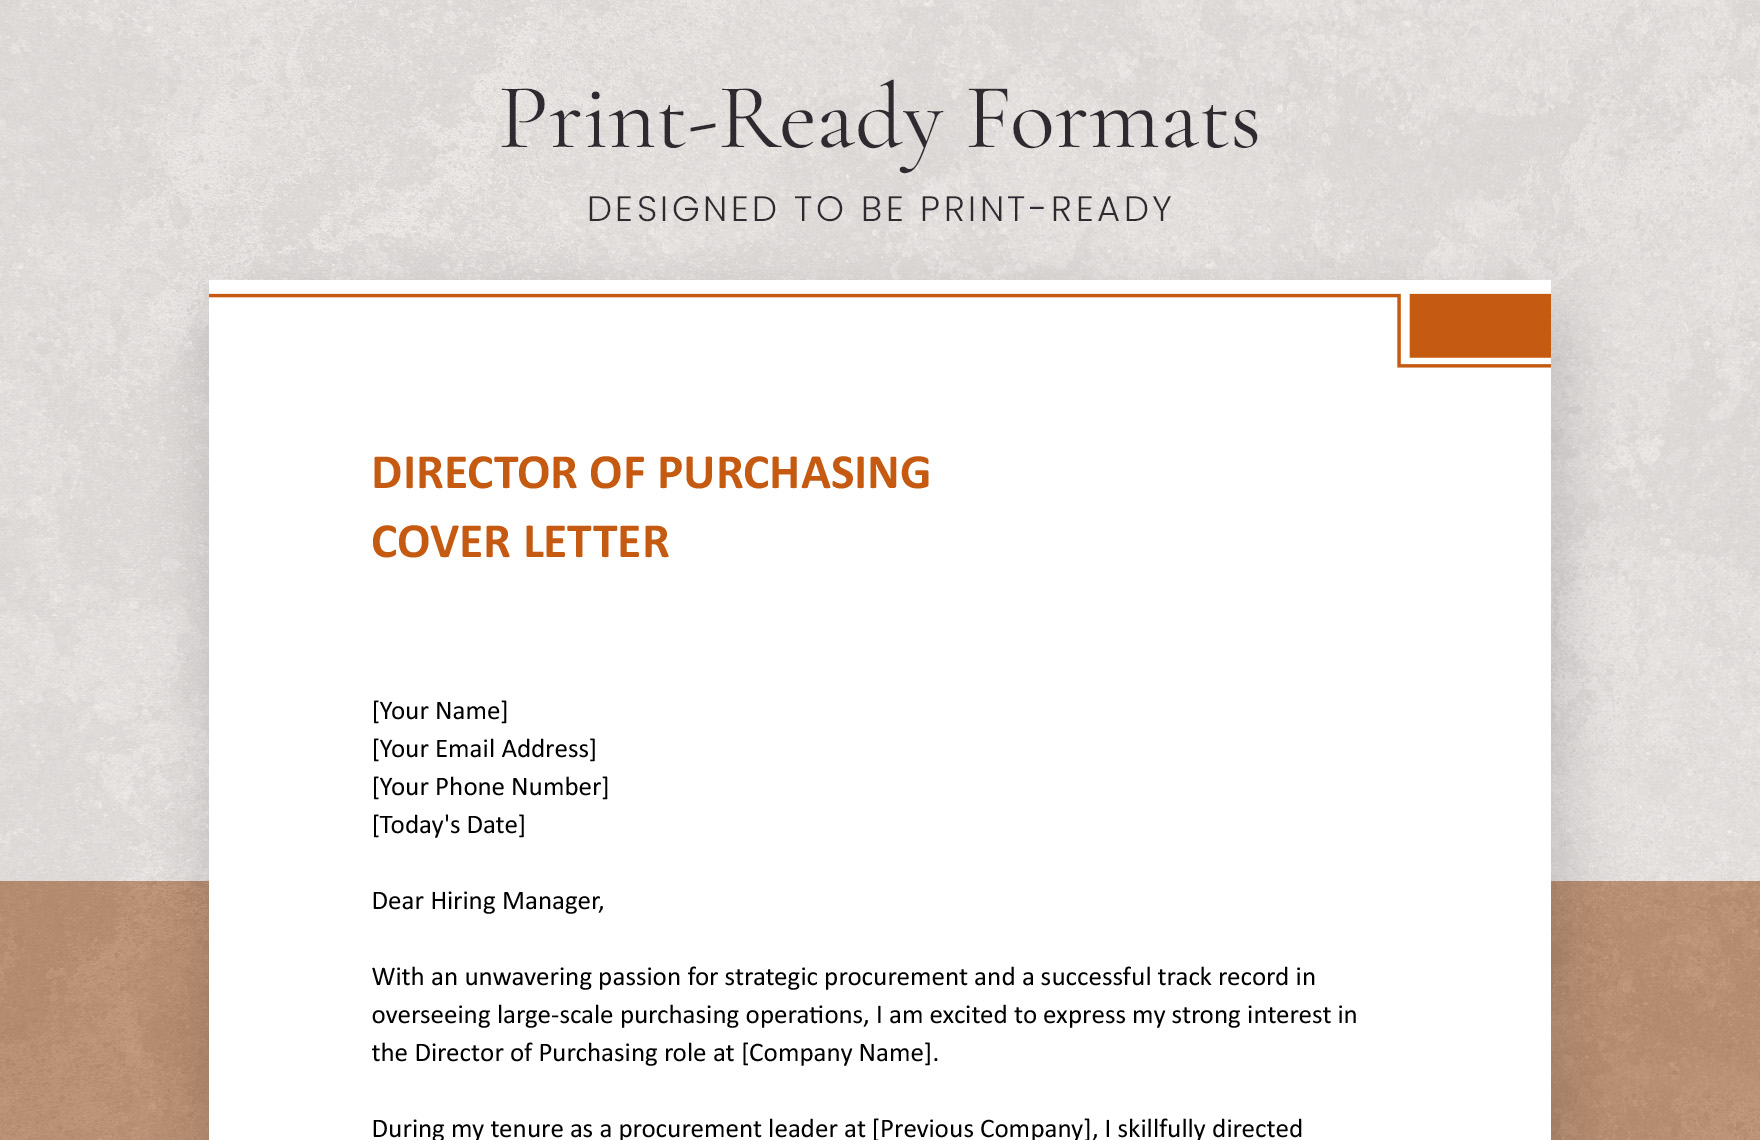 Director of Purchasing Cover Letter